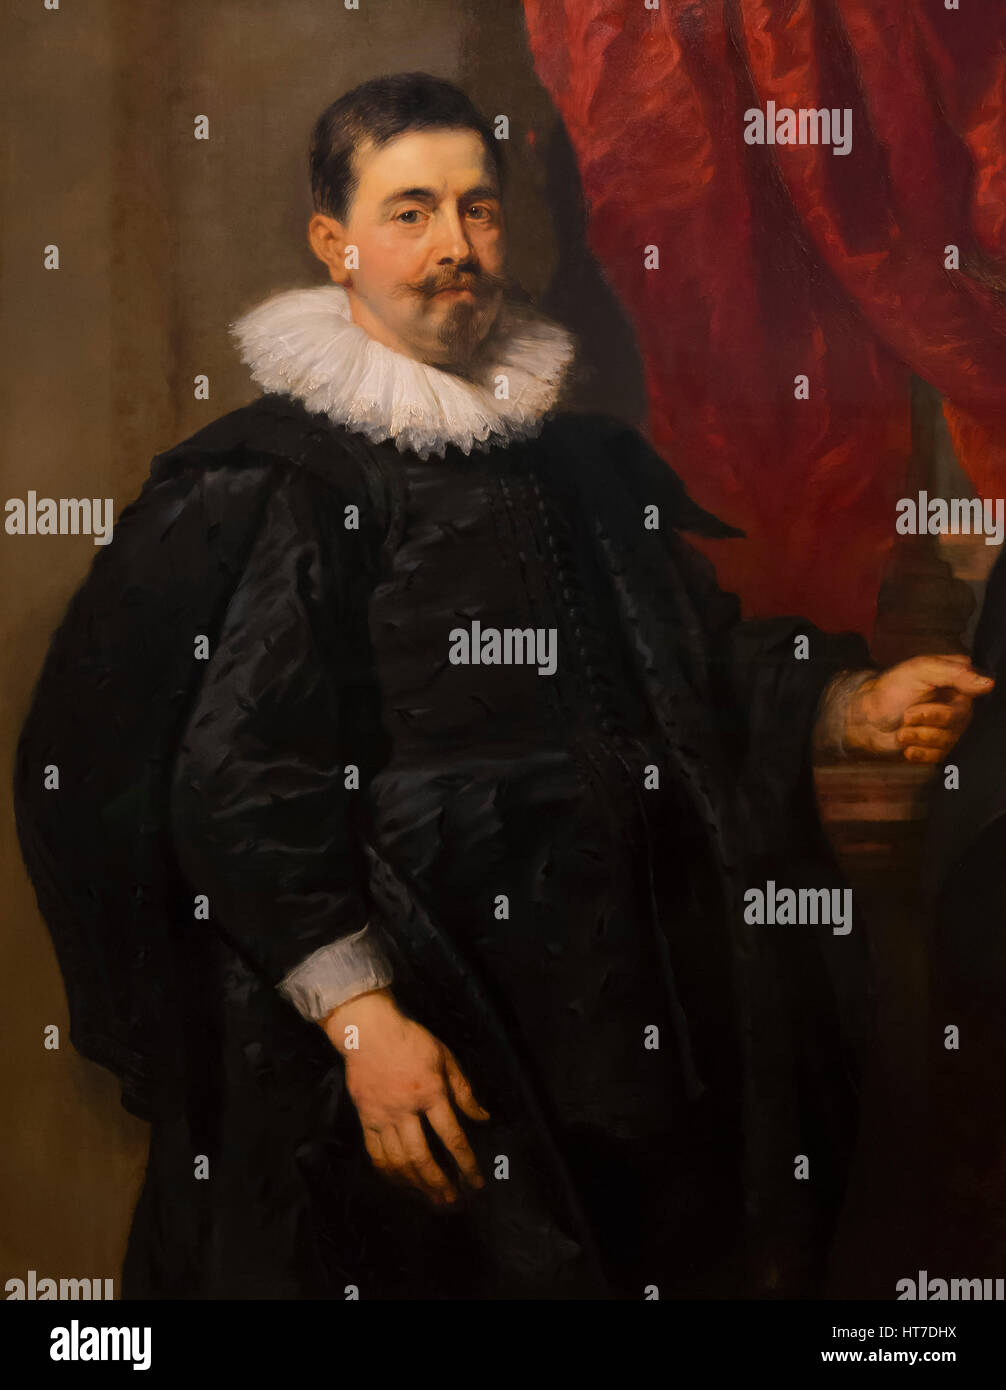 Portrait of a Man, possibly Peter van Hecke, by Peter Paul Rubens, circa 1630, Royal Art Gallery, Mauritshuis Museum, The Hague, Netherlands, Europe Stock Photo